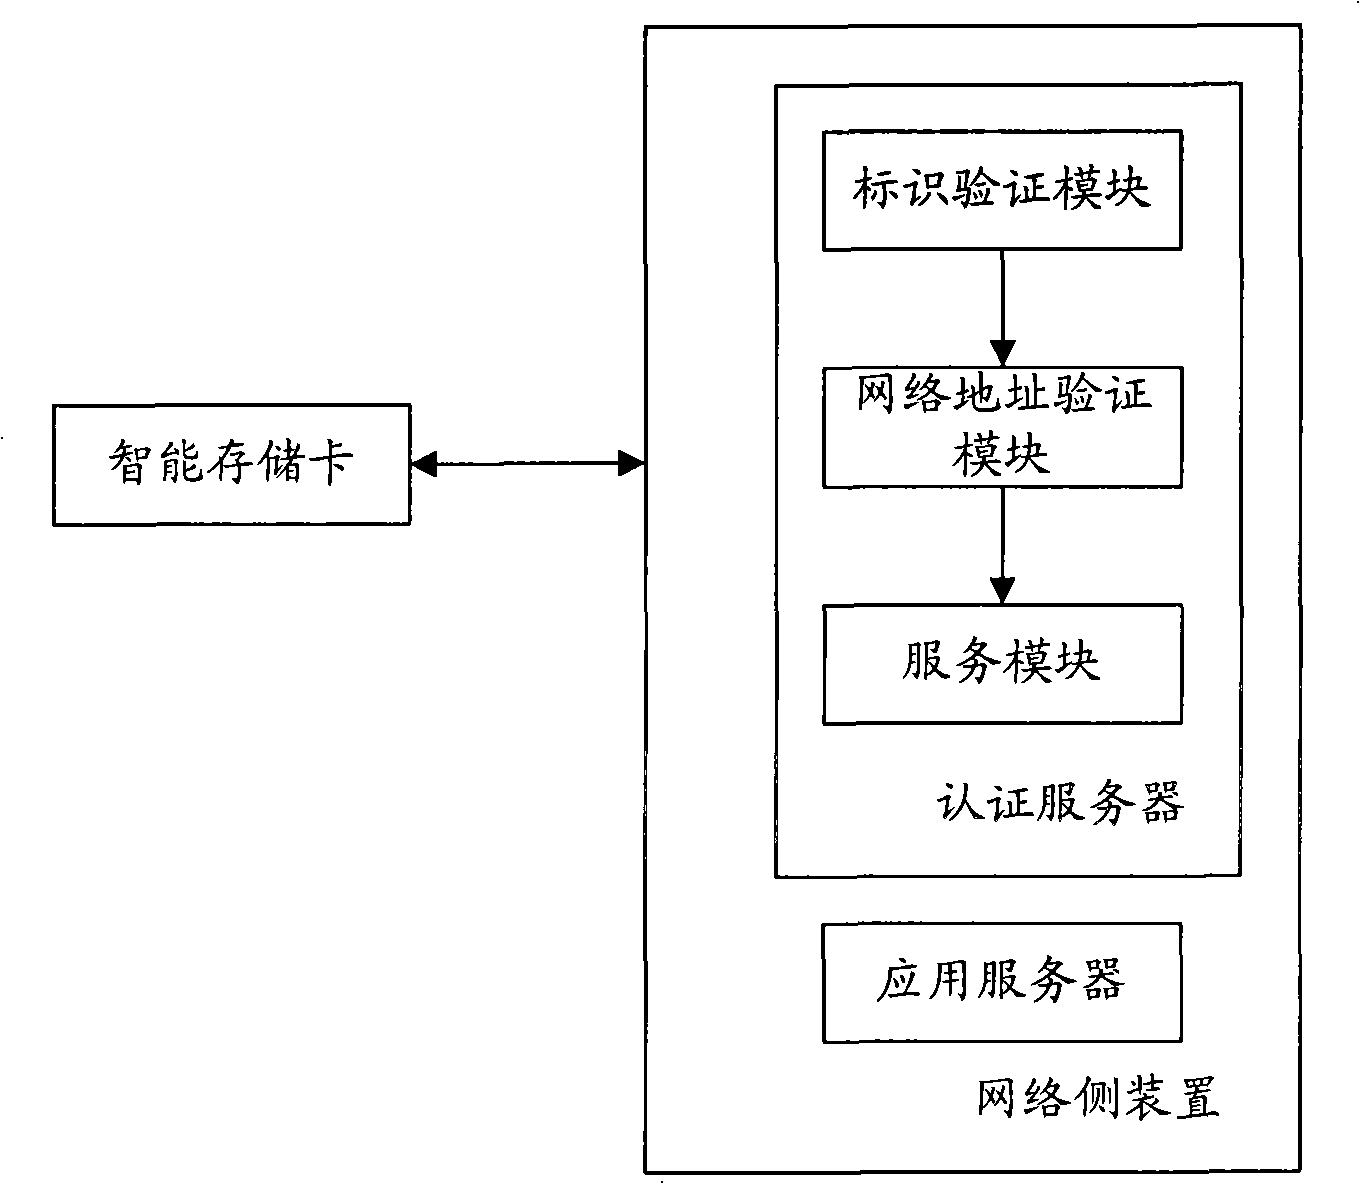 Method and apparatus implementing remote access control based on portable memory apparatus